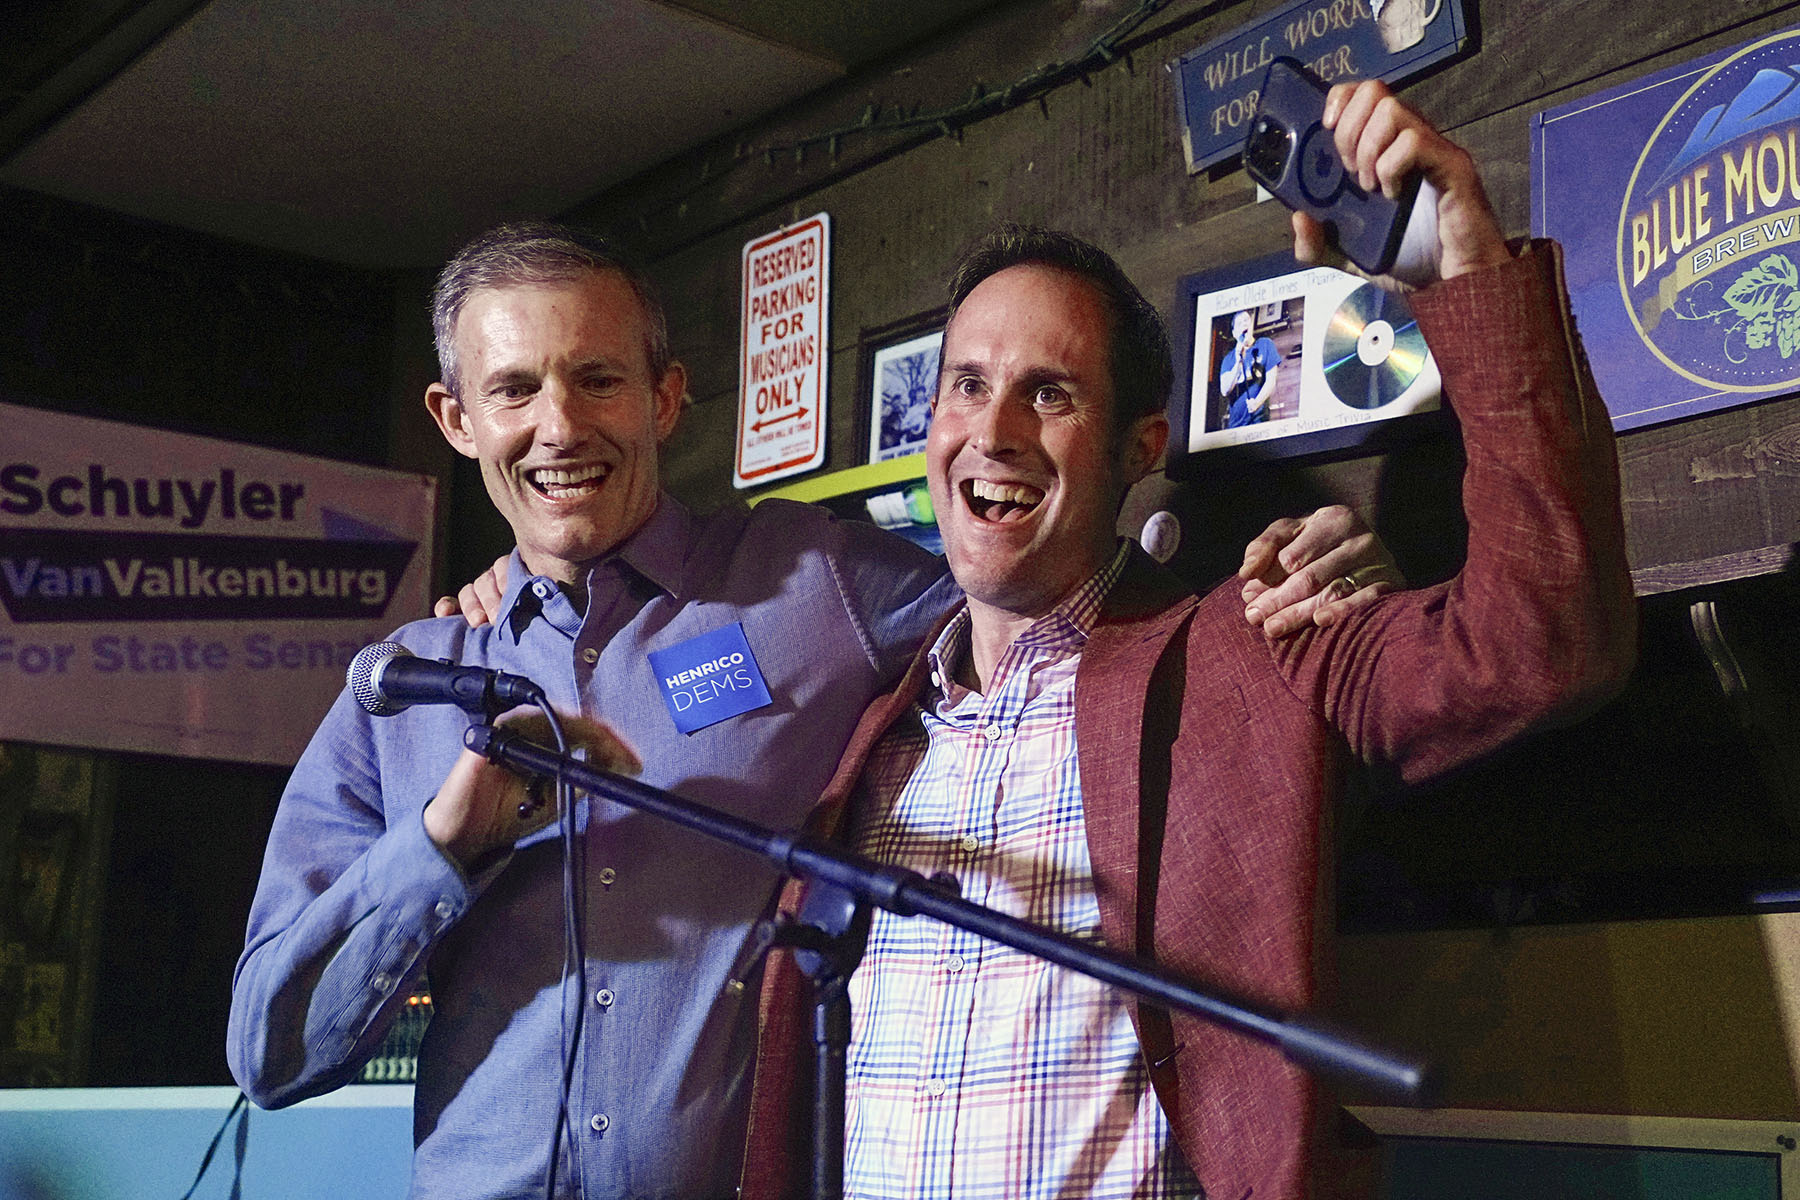 Democrats Del. Schuyler VanValkenburg, (right) and Del. Rodney Willett celebrate on stage at an election party in Richmond, Virginia.